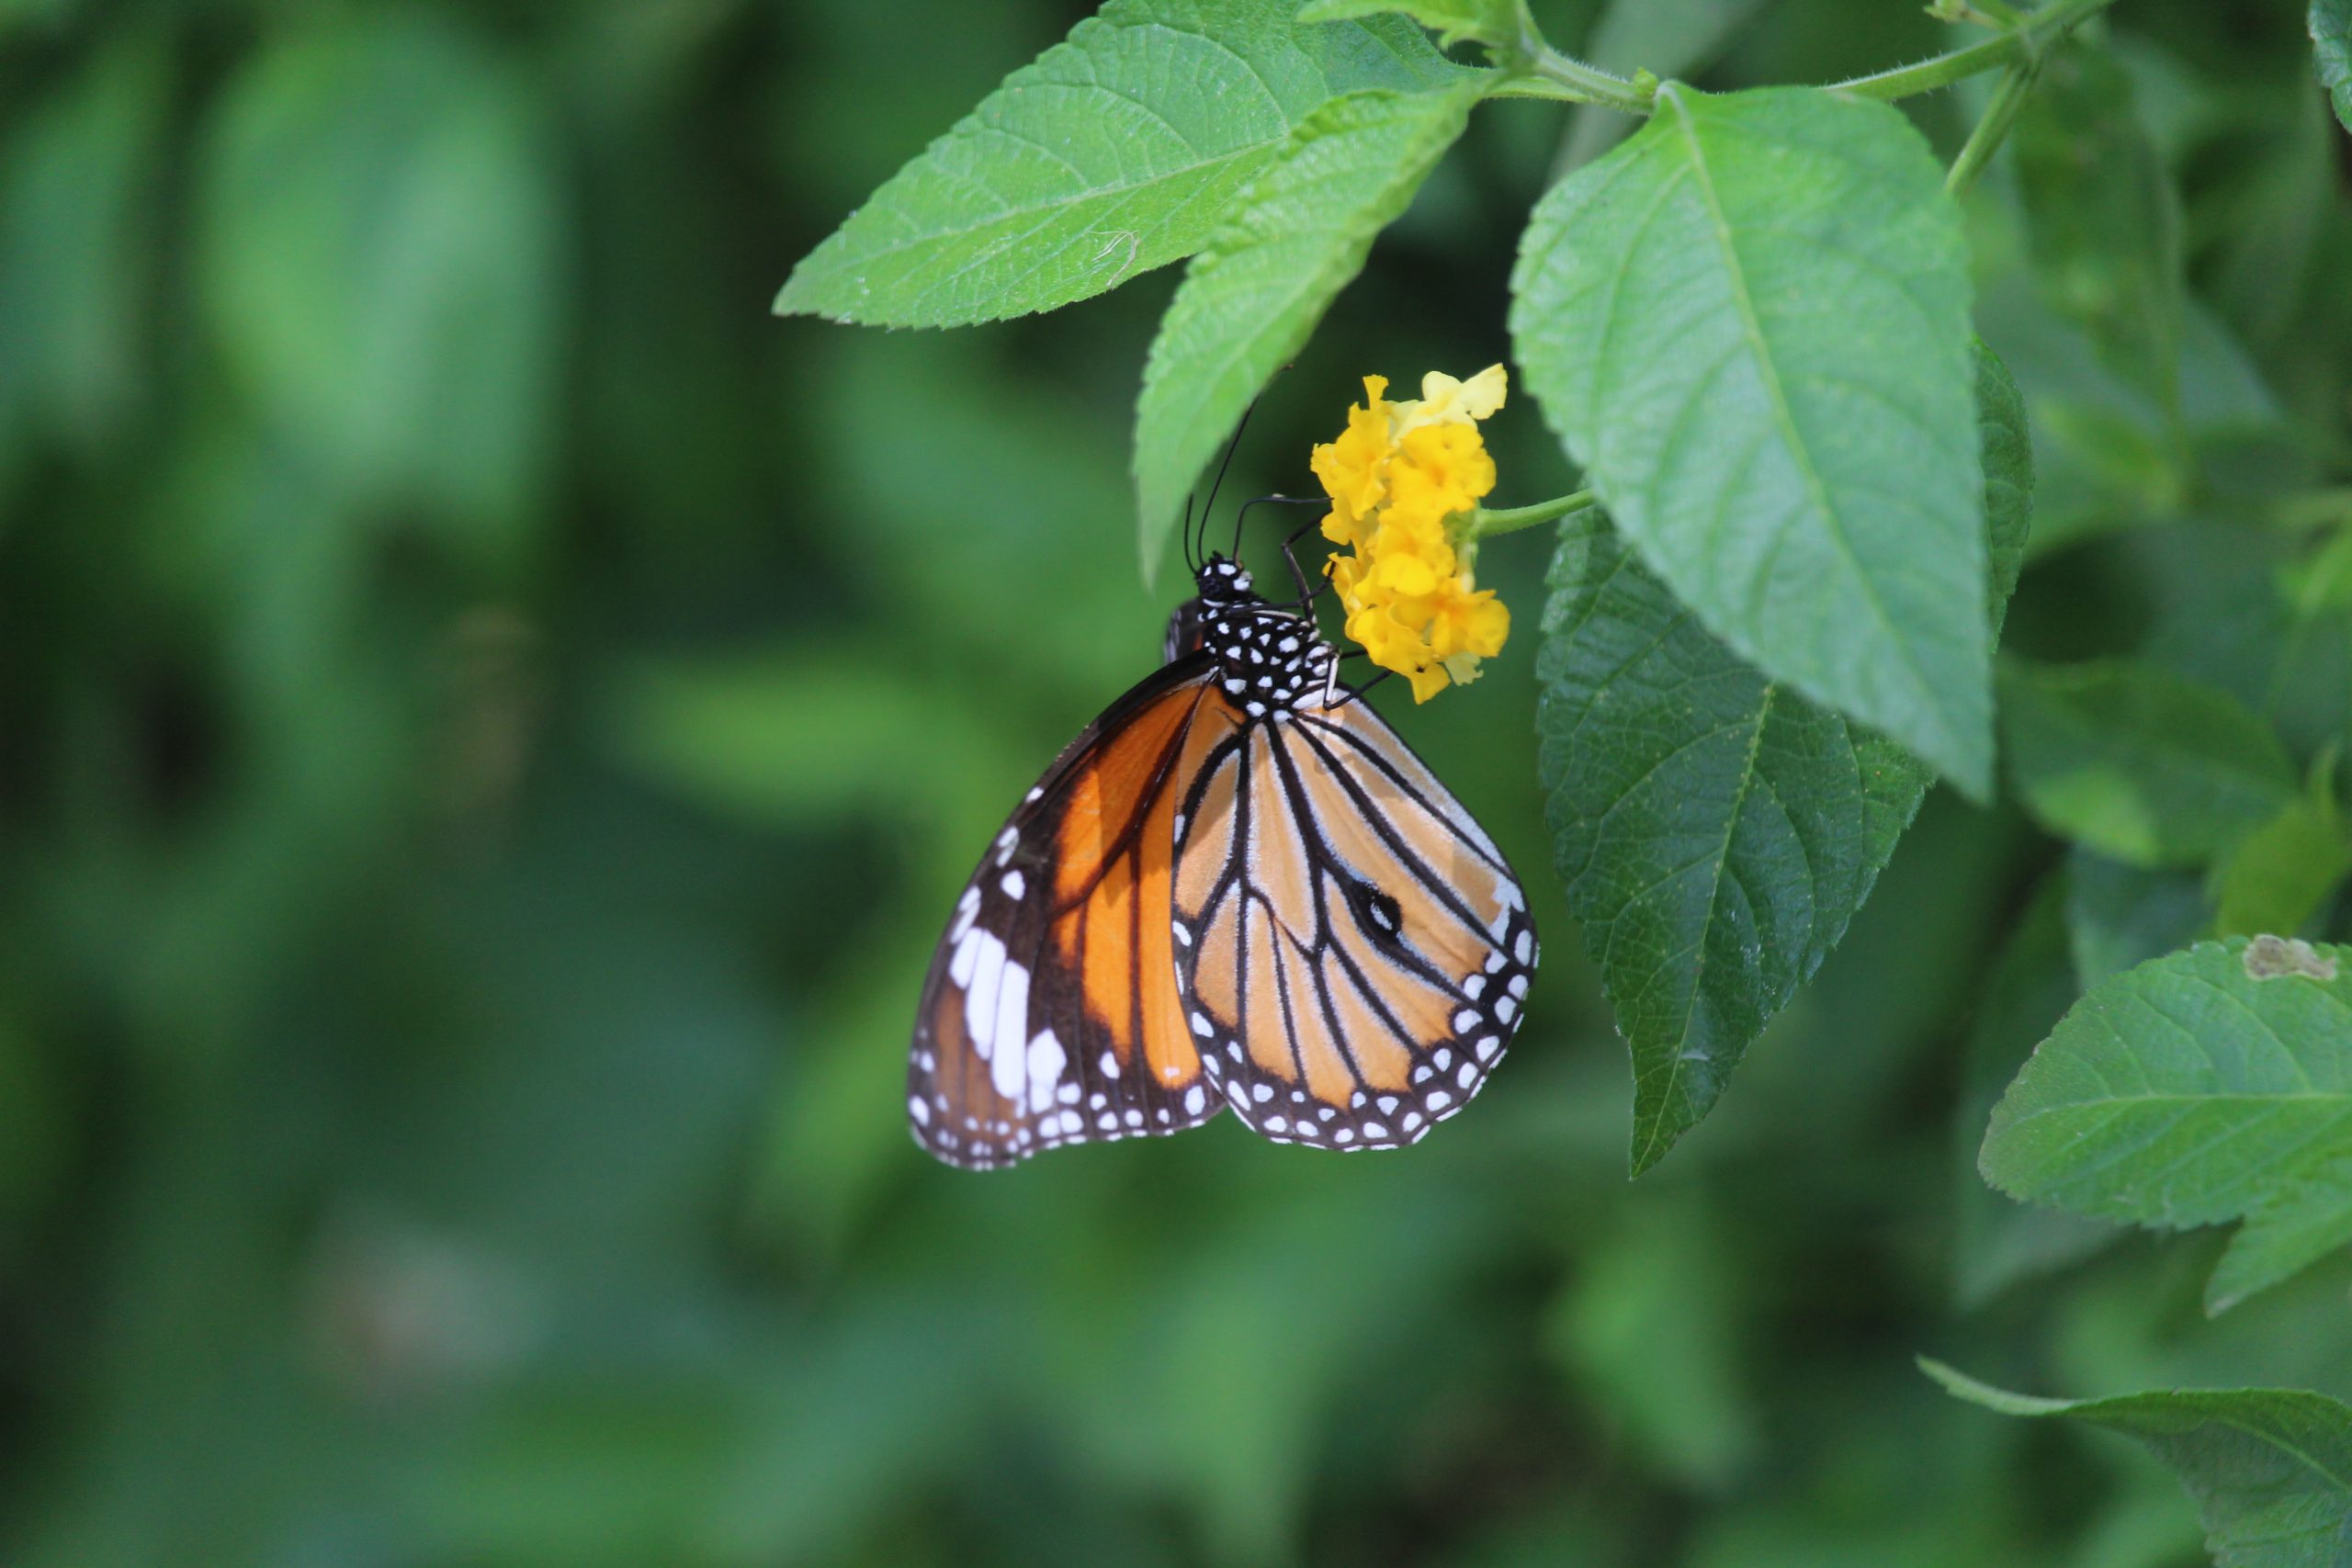 Monarch butterfly on a yellow flower